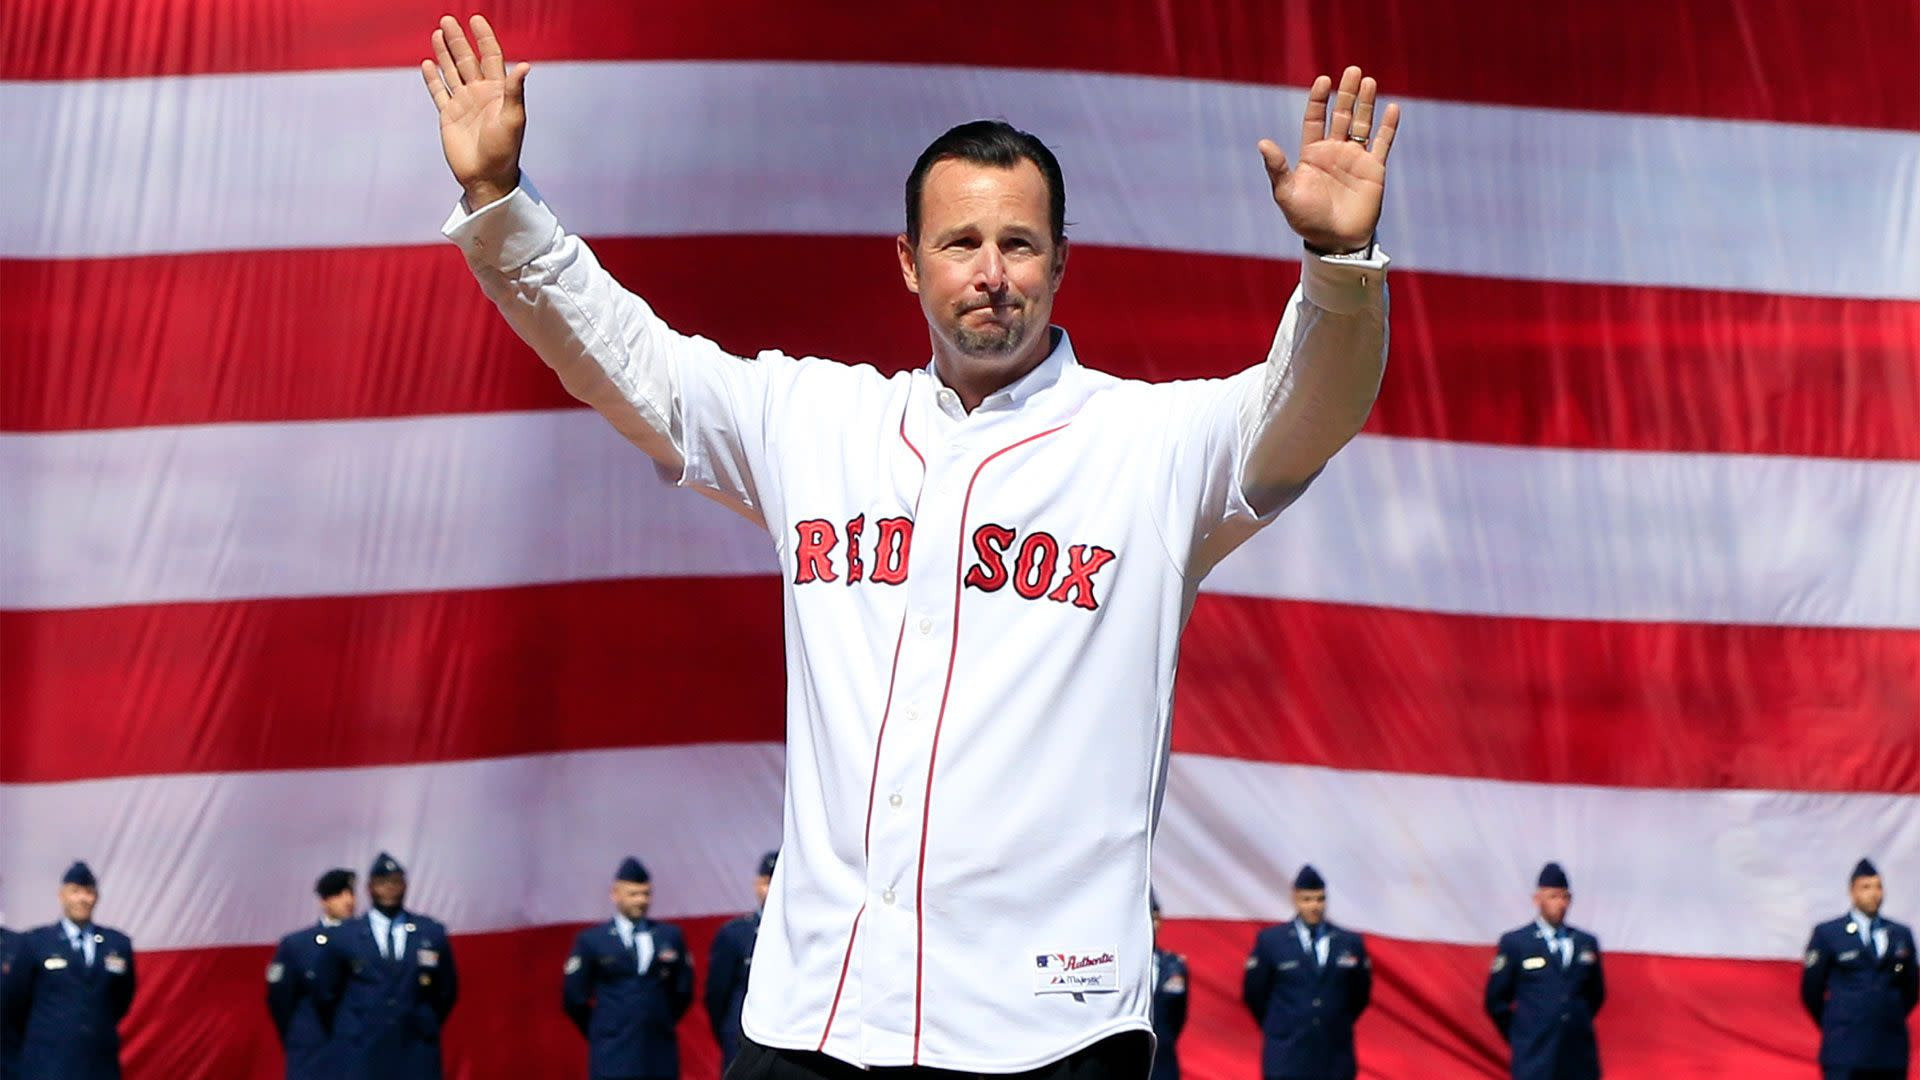 Tim Wakefield's legacy goes beyond balls and strikes